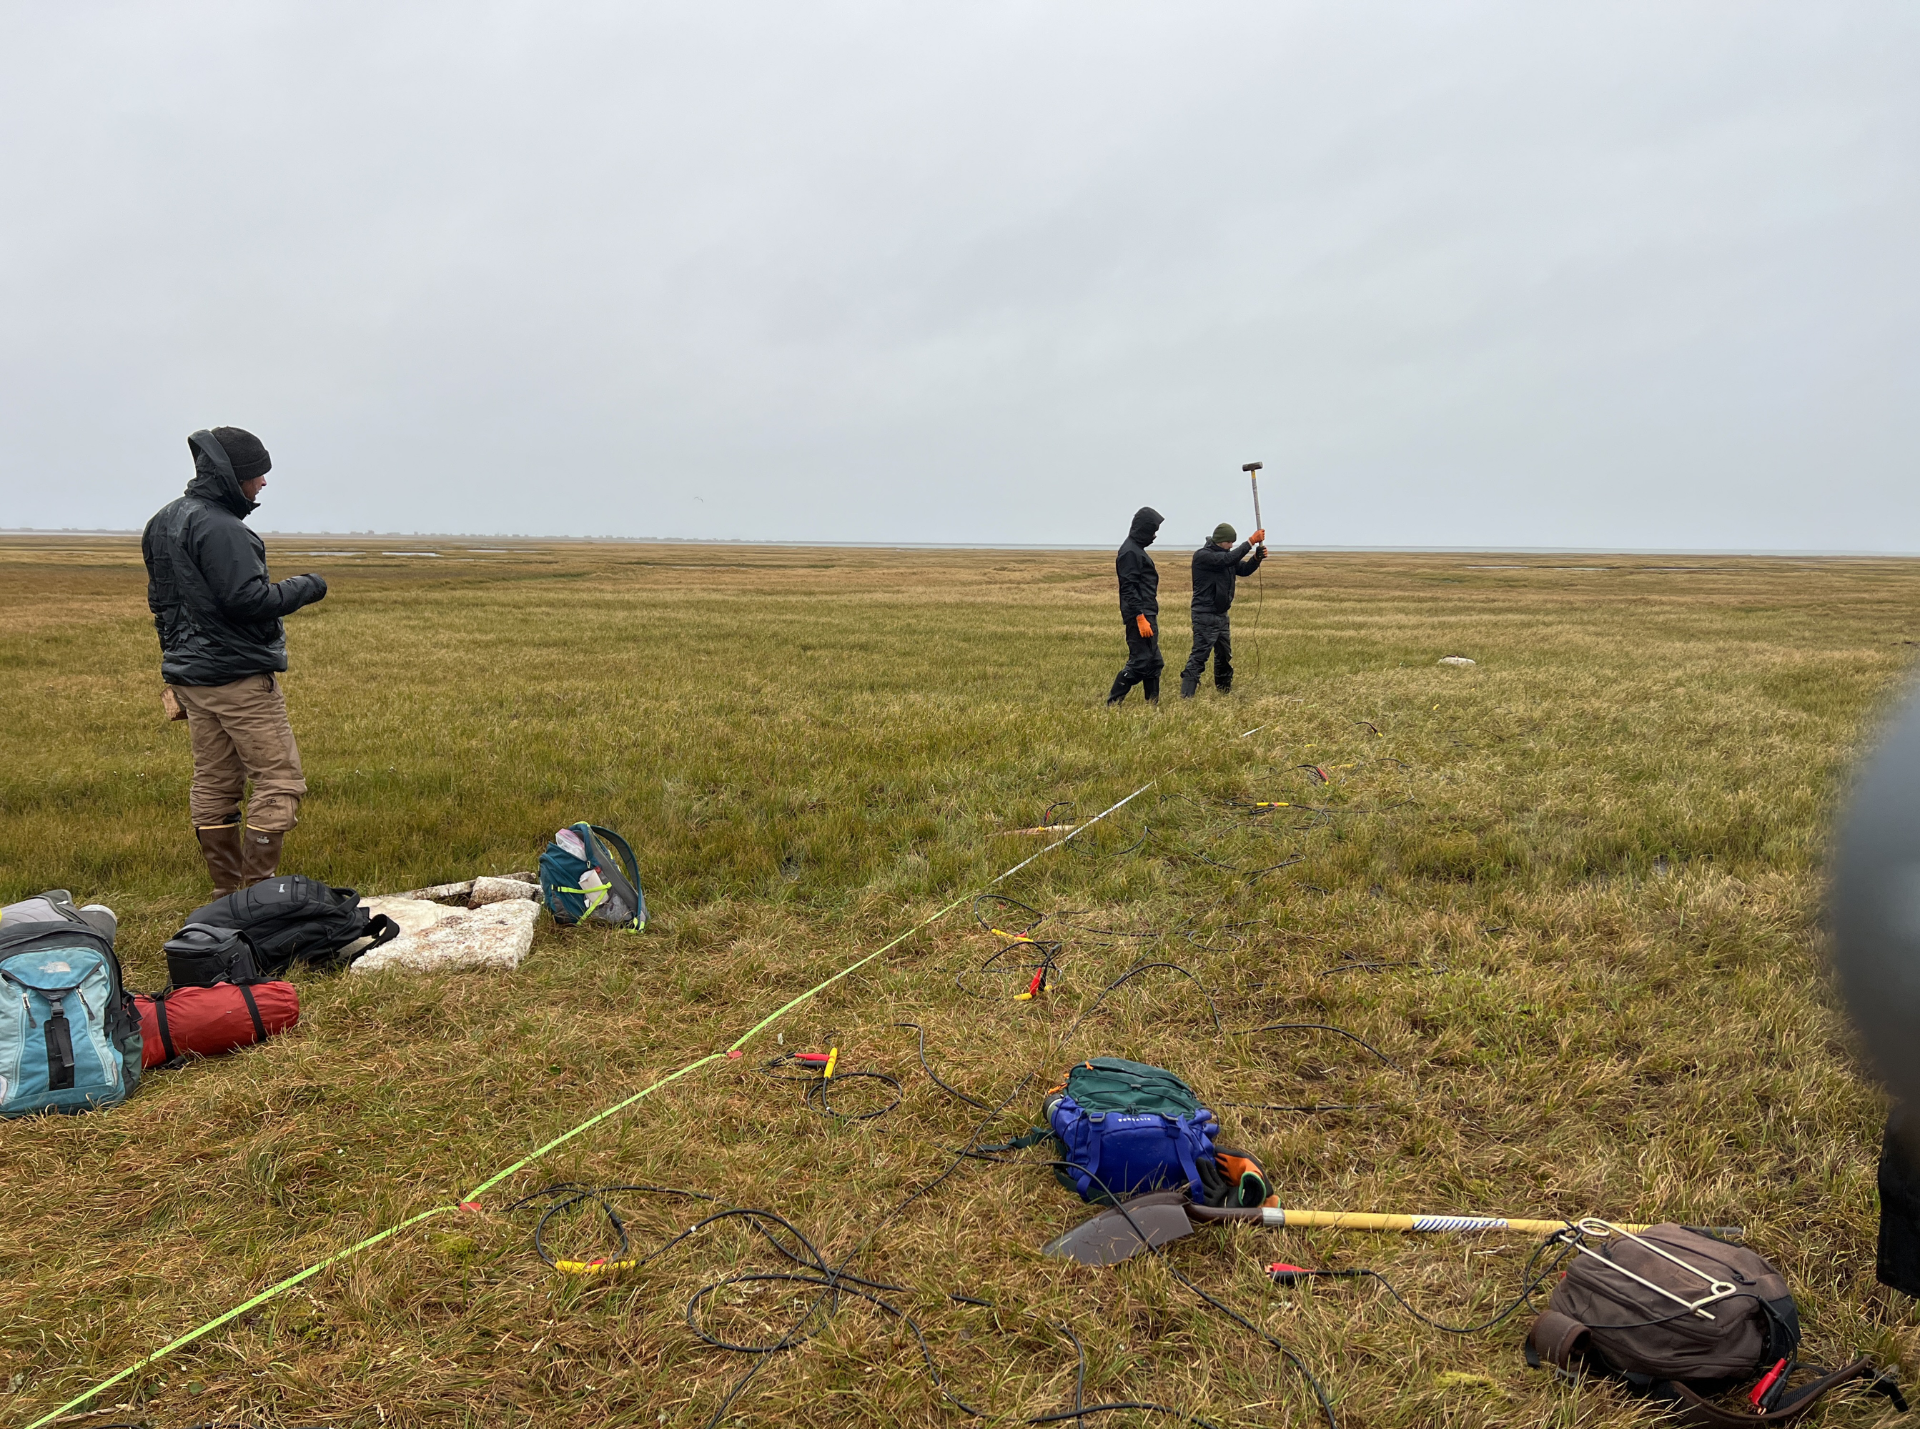 An array of 24 geophones deployed to image near-surface permafrost in Utqiagvik, AK